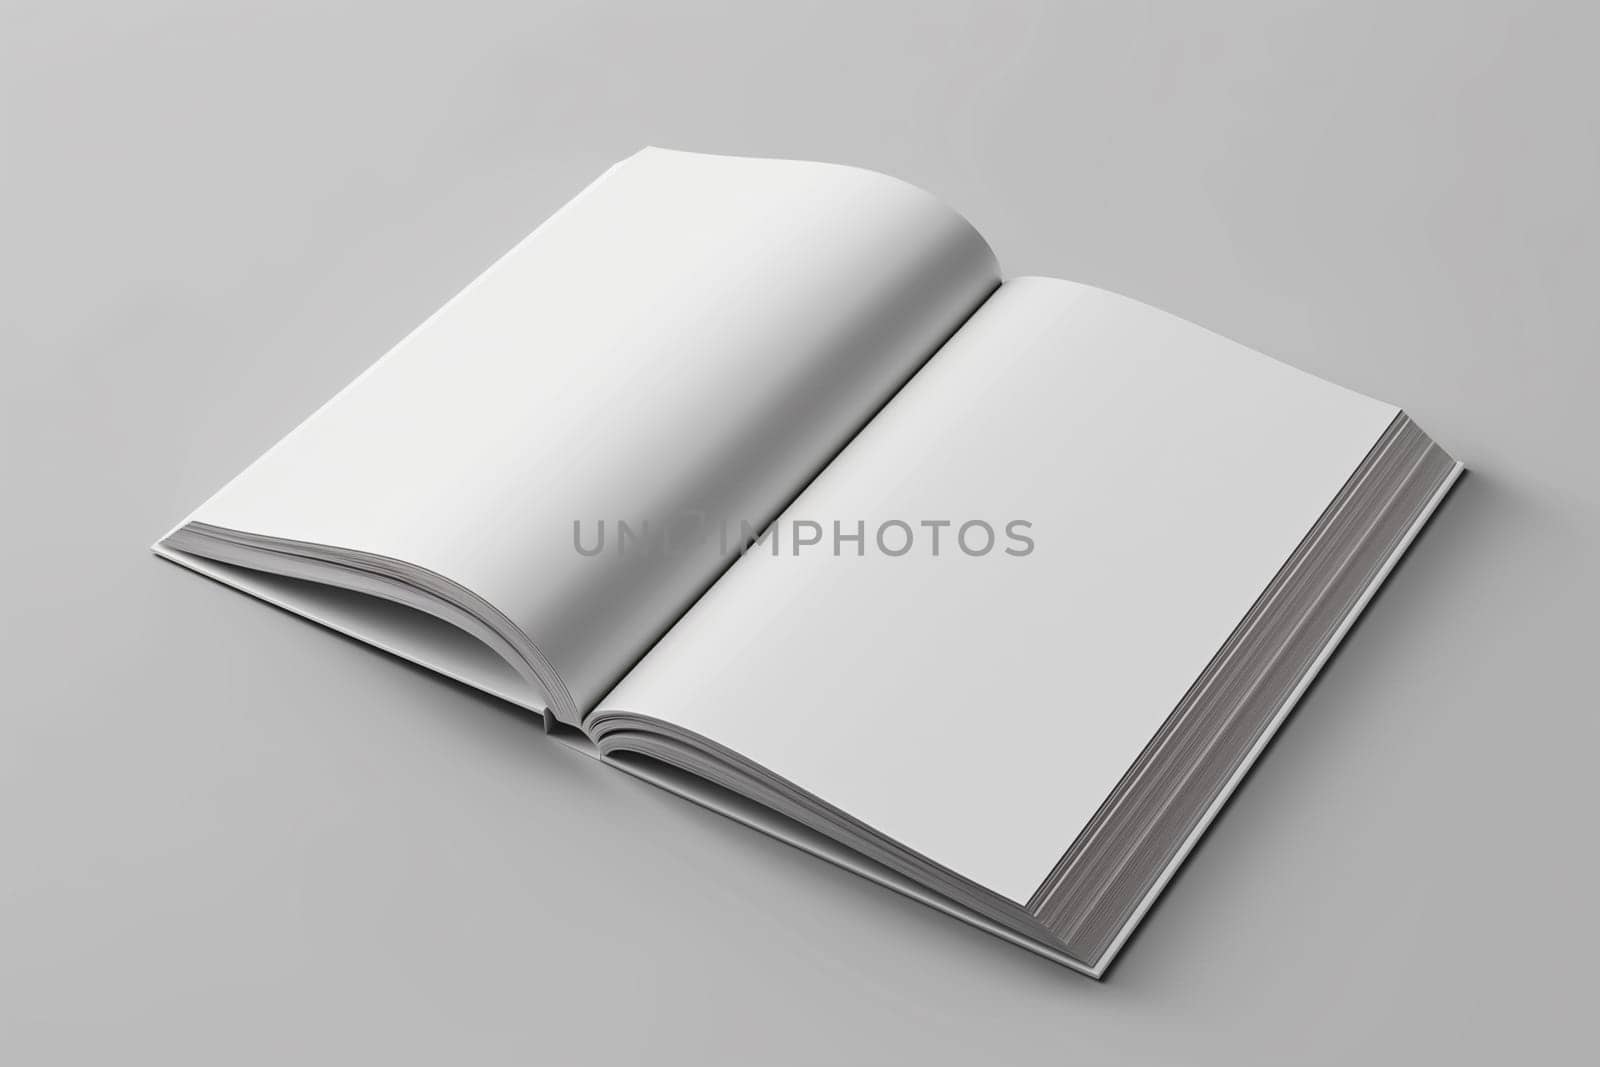 An open book resting on a plain gray background, showcasing its pages and cover. Mockup